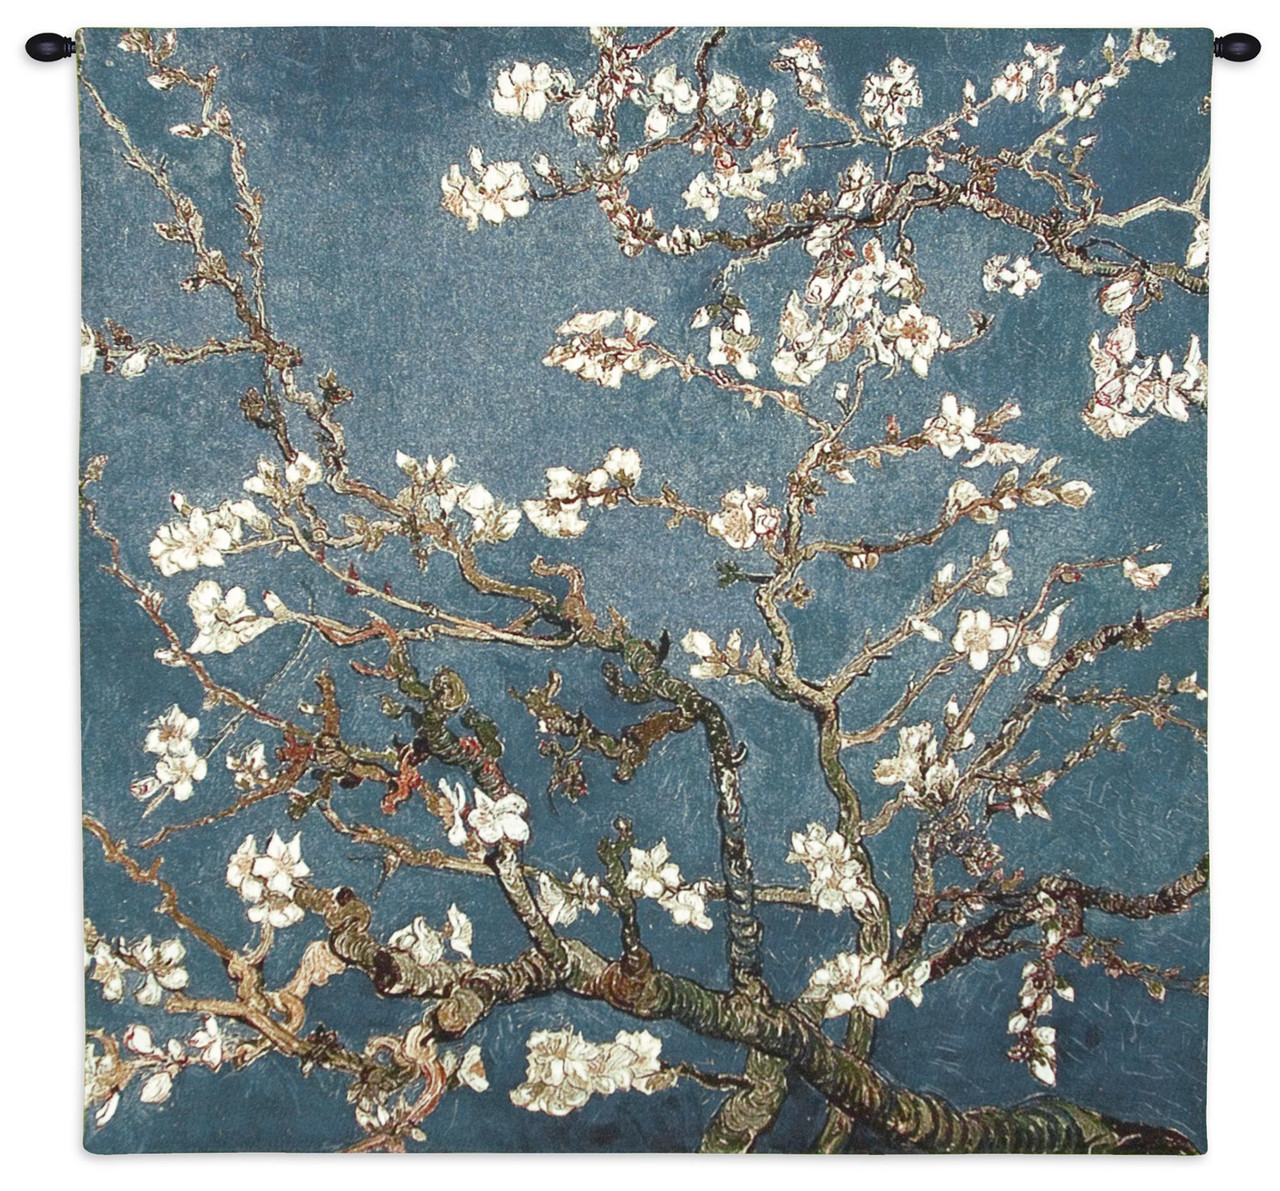 Blossoming Almond Tree by Vincent van Gogh Woven Tapestry Wall Art Hanging  Contrasting Scenery with White Flowers 100% Cotton USA Size 35x35